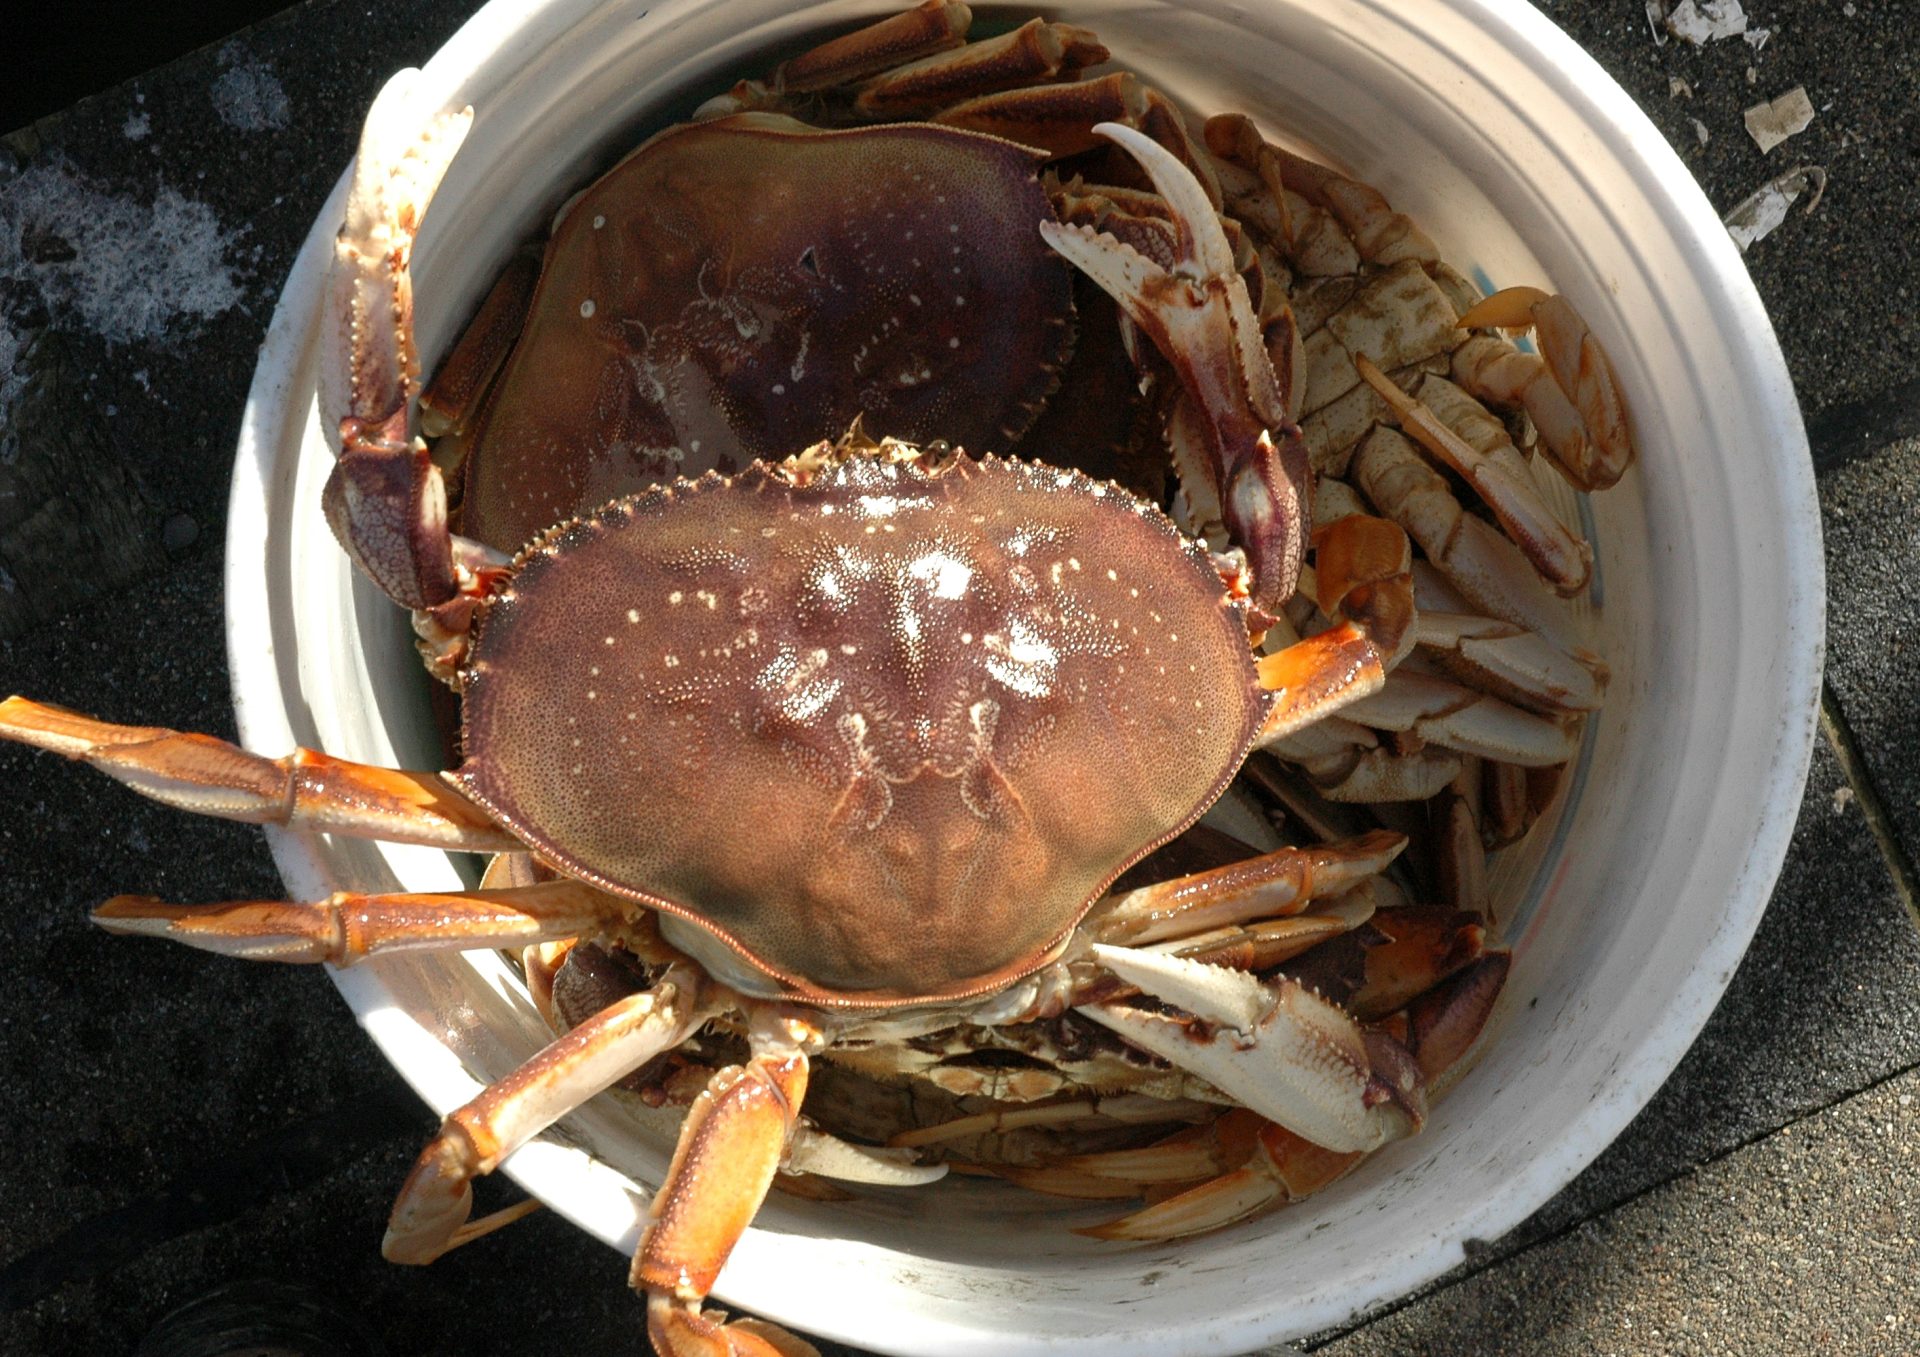 Crabbers must be accountable for their share of the harvest